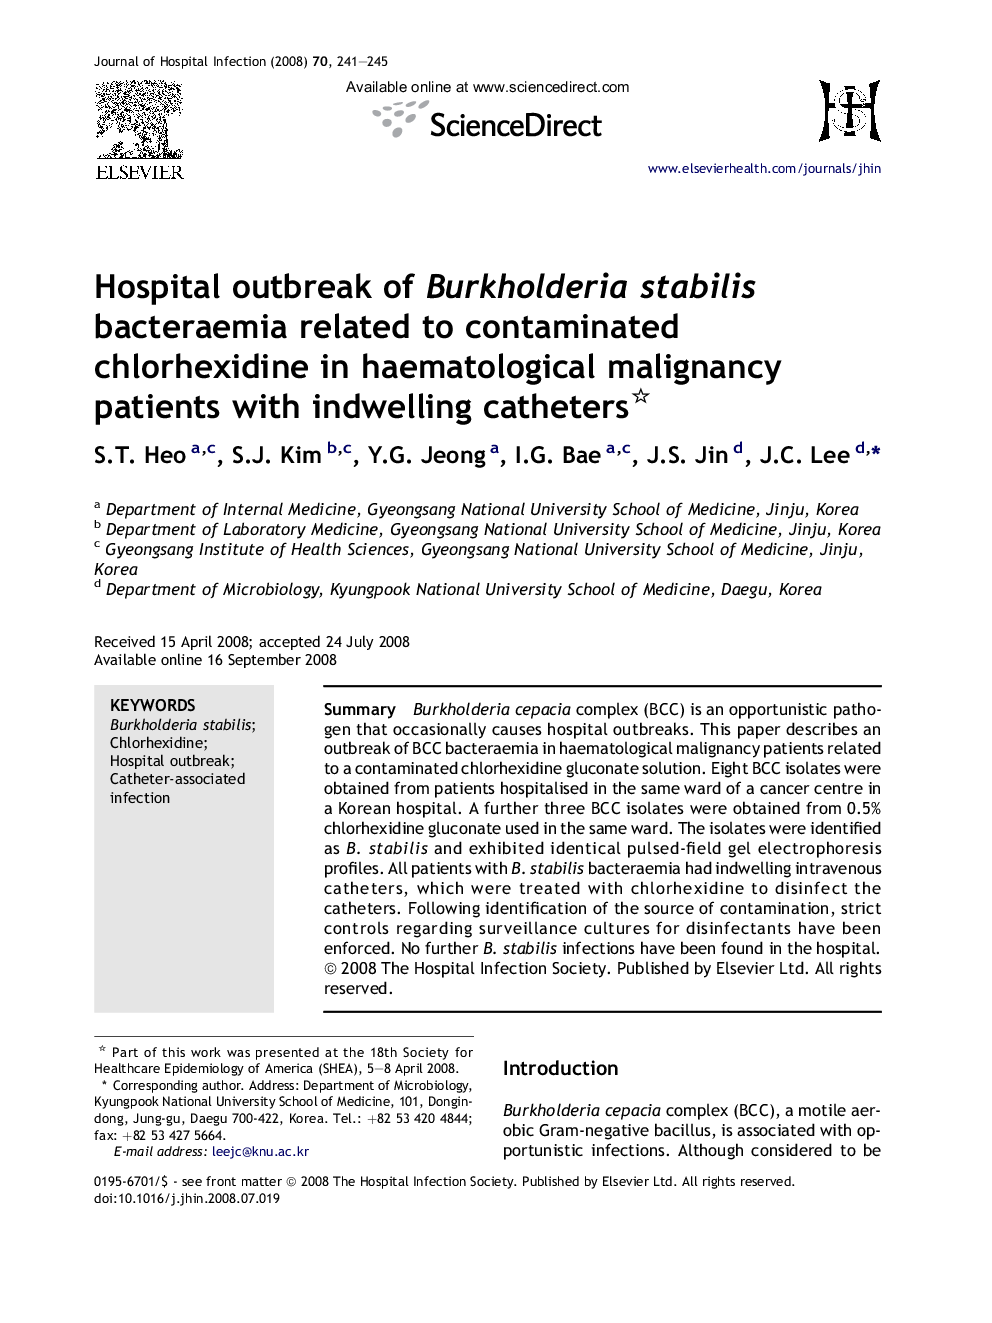 Hospital outbreak of Burkholderia stabilis bacteraemia related to contaminated chlorhexidine in haematological malignancy patients with indwelling catheters 